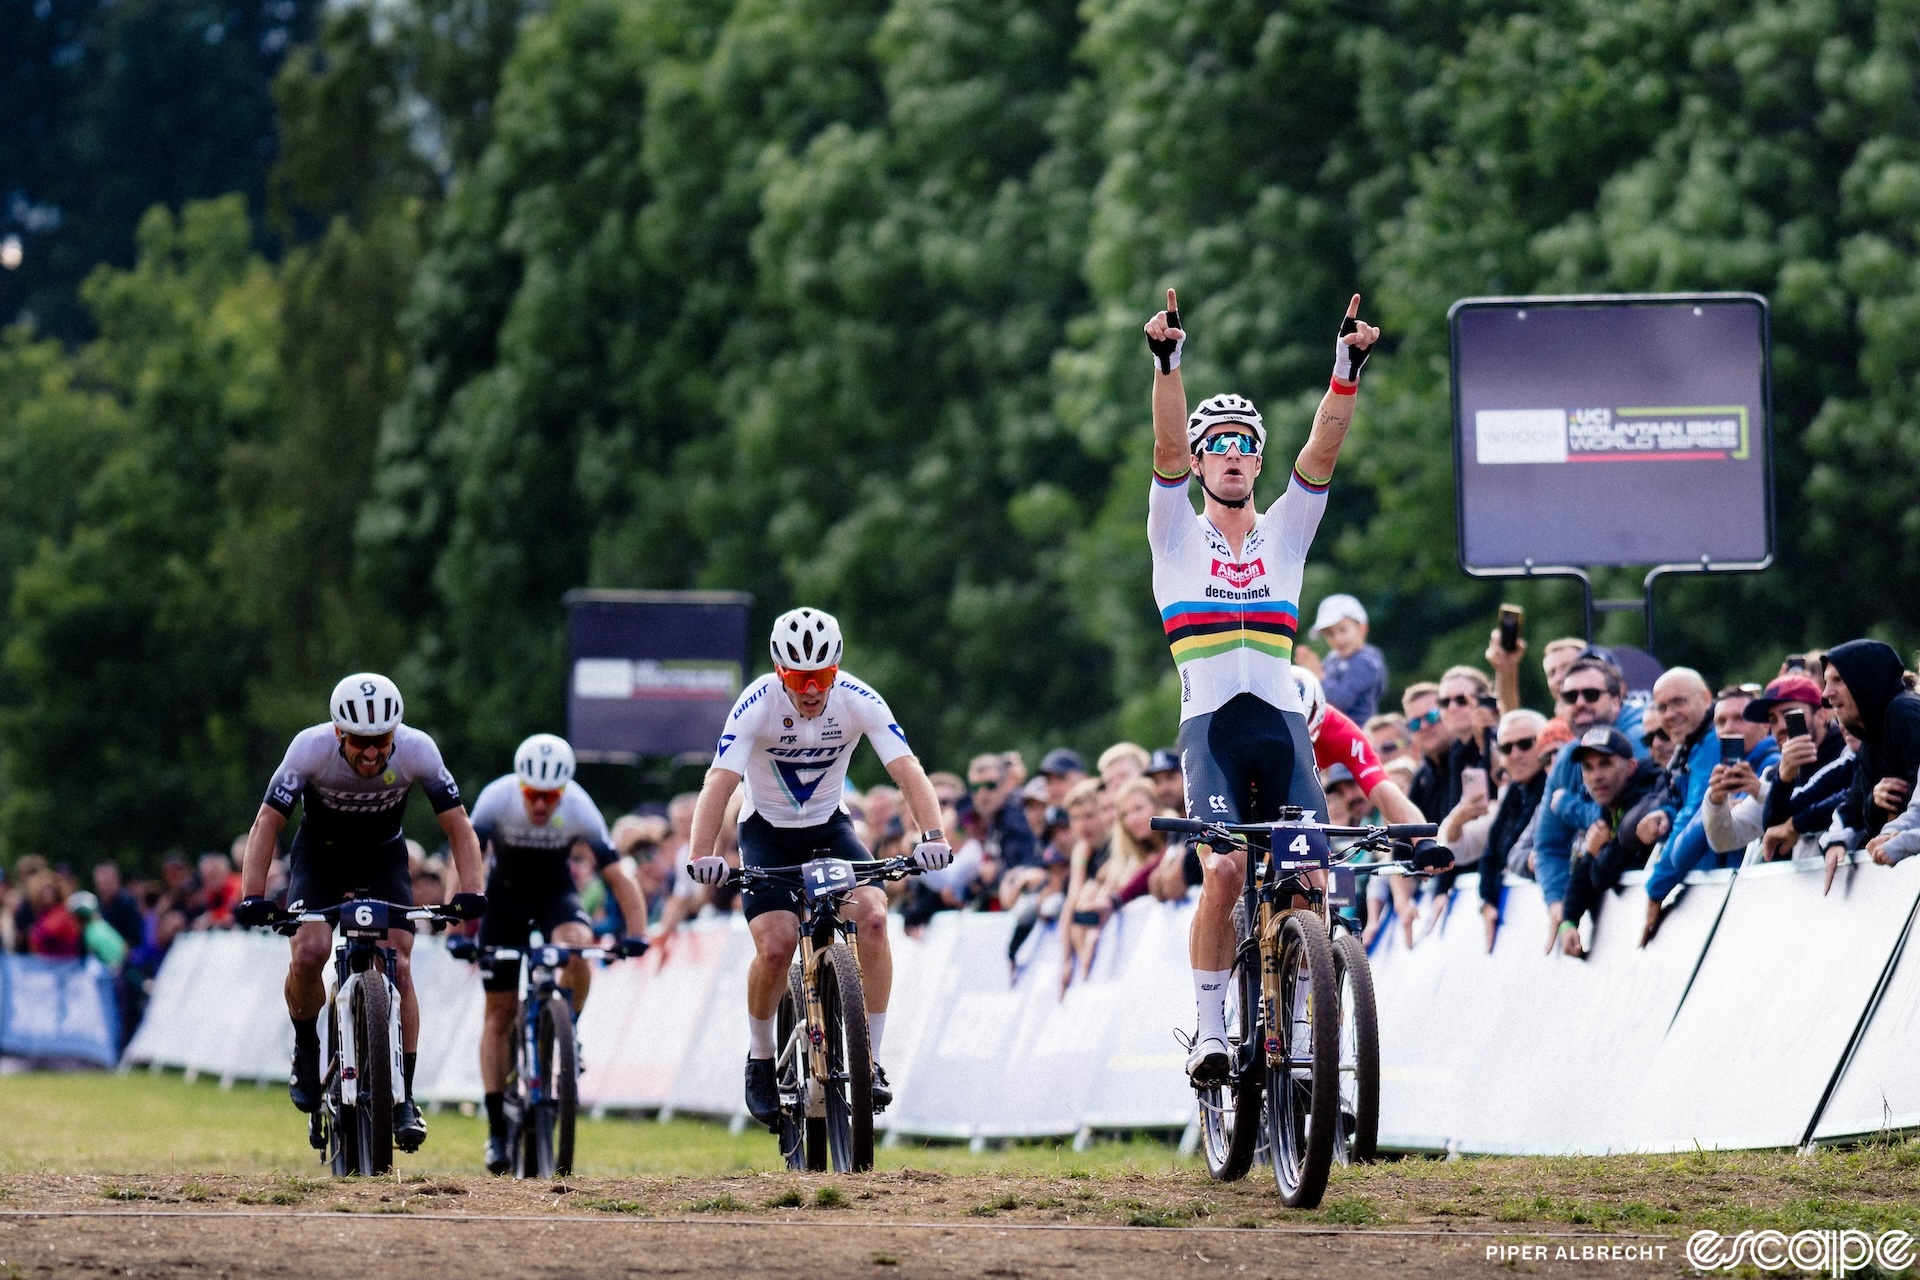 Sam Gaze punches both hands in the air with index fingers up as he outsprints a small group to win the XCC at the Val di Sole Mountain Bike World Cup.